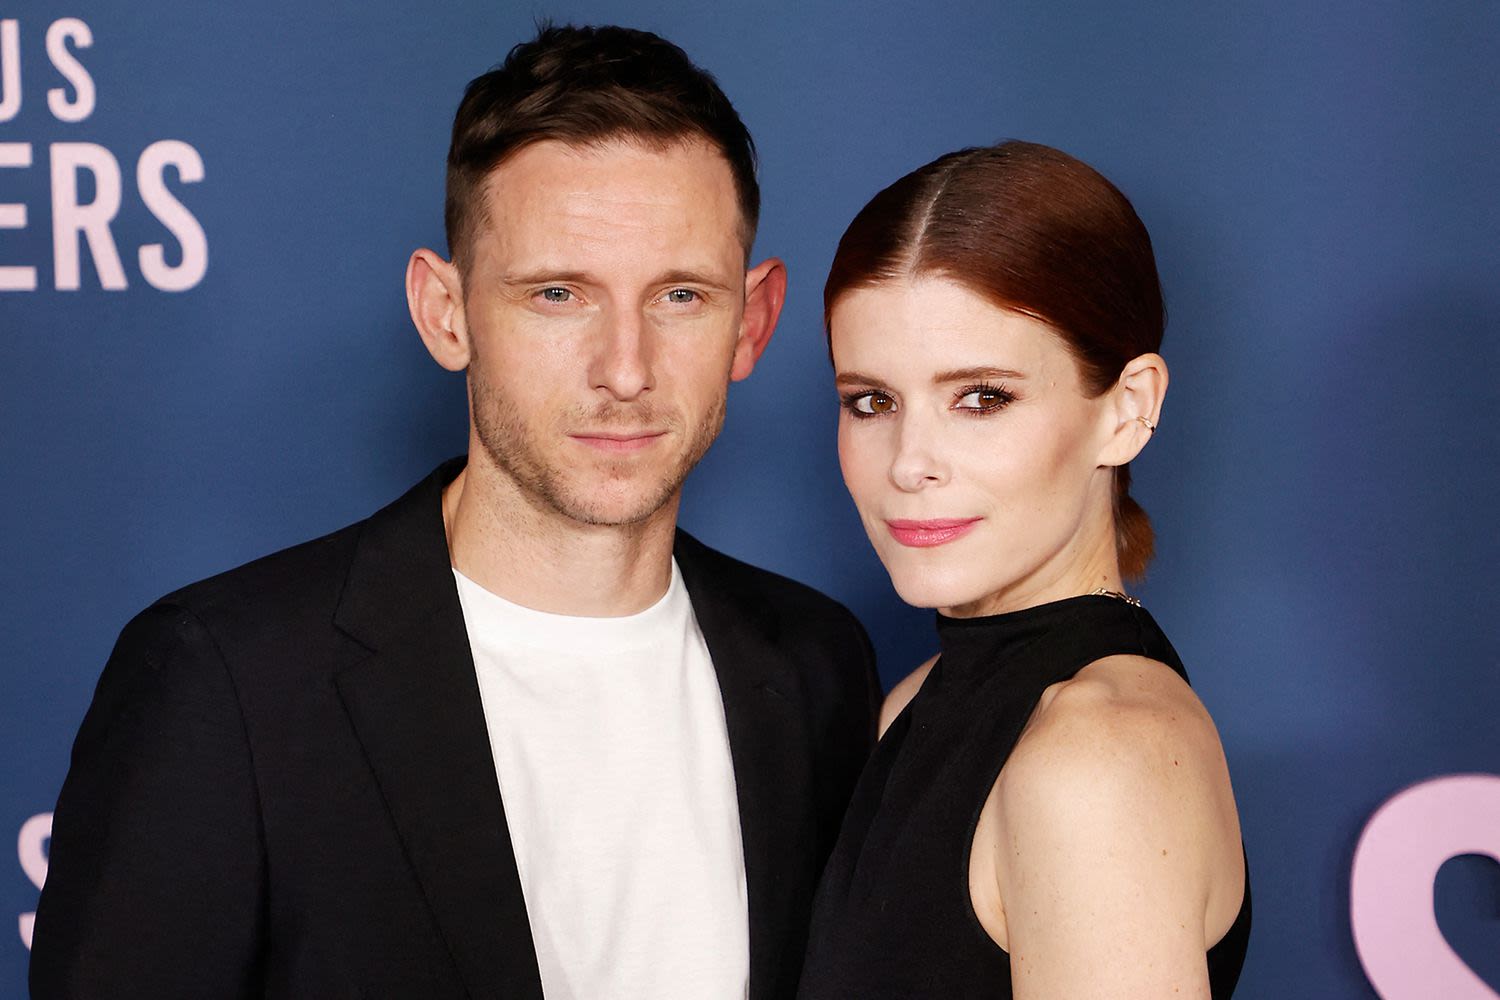 All About Kate Mara and Jamie Bell’s Relationship: From Meeting on Set to Their Private Family Life